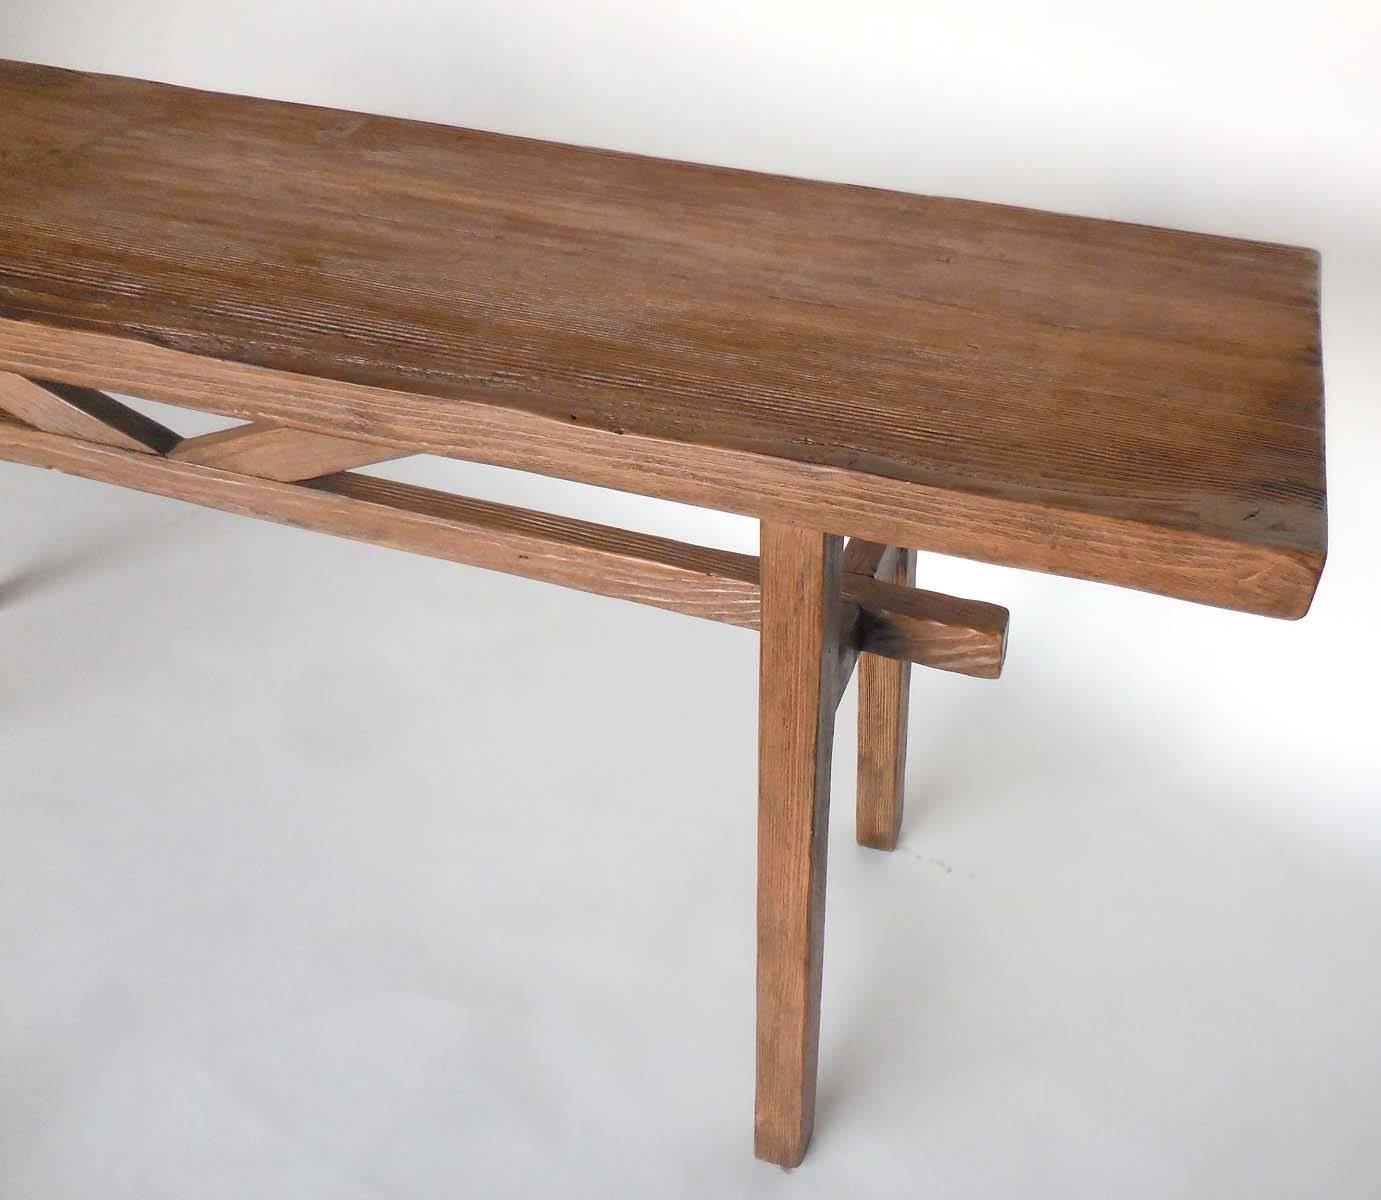 Rustic Reclaimed Wood Console with High V Stretcher by Dos Gallos Studio